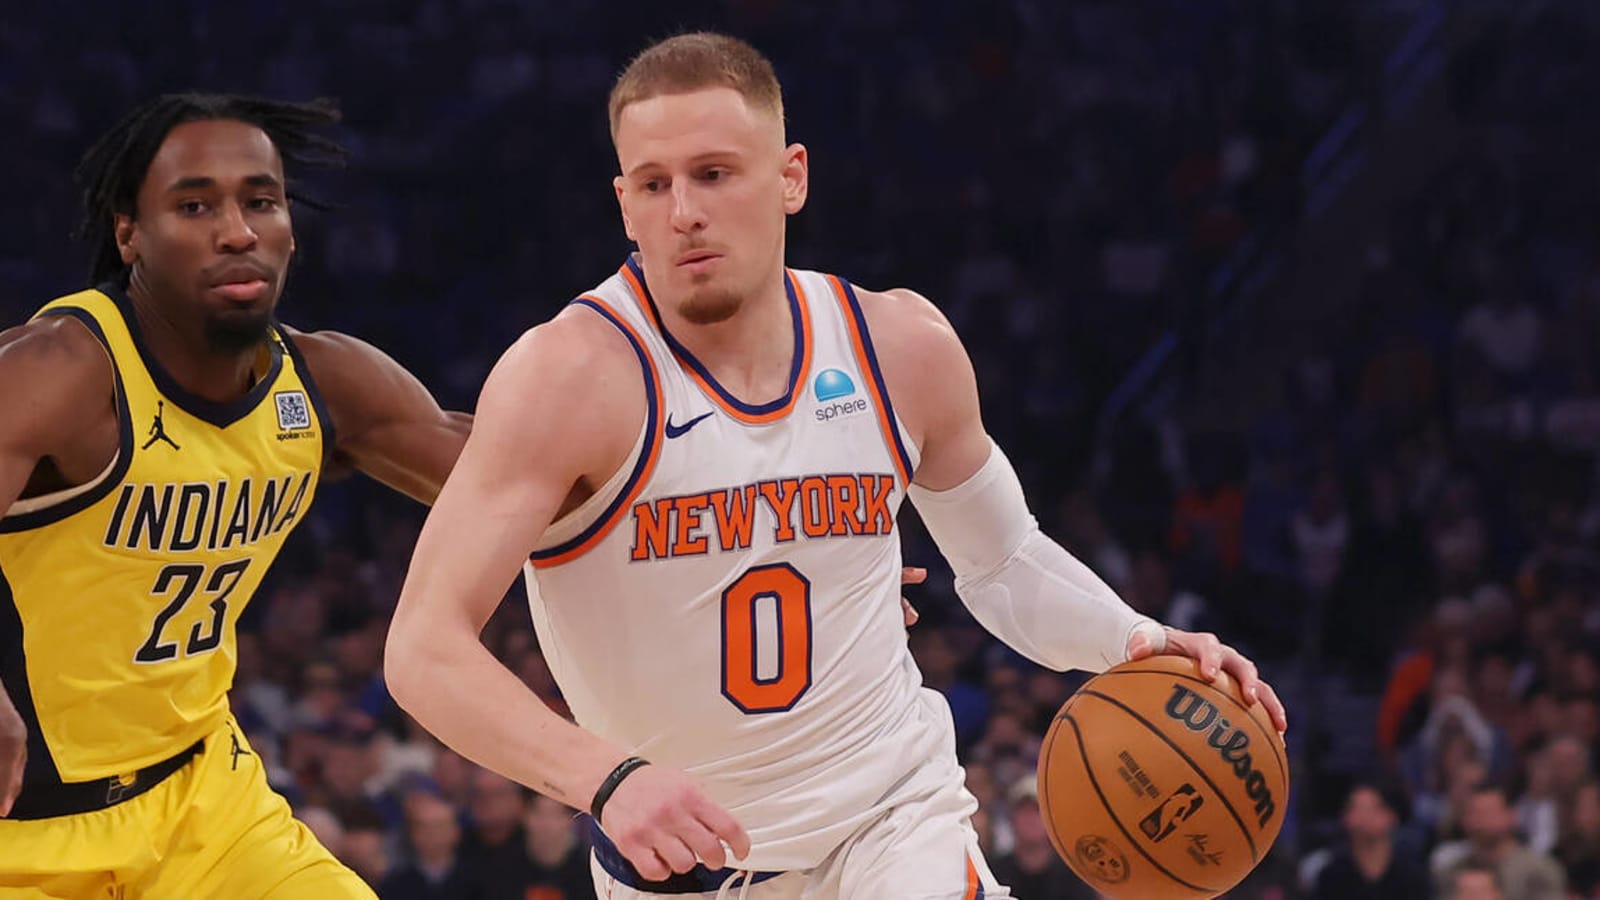 Watch: Donte DiVincenzo makes, absorbs big shot to win Game 1